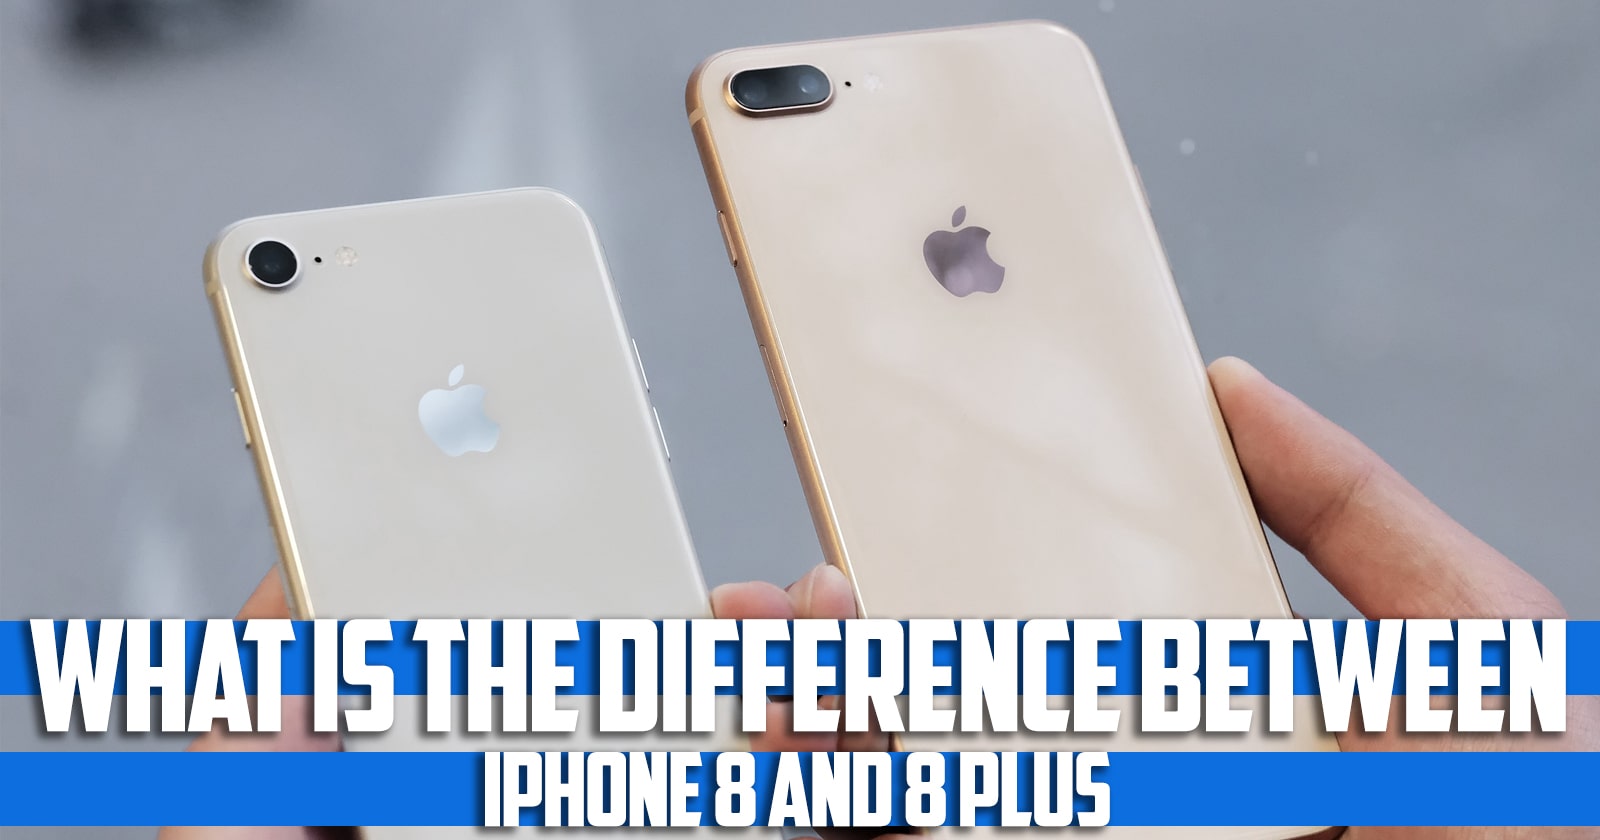 What is the difference between iPhone 8 and 8 plus?